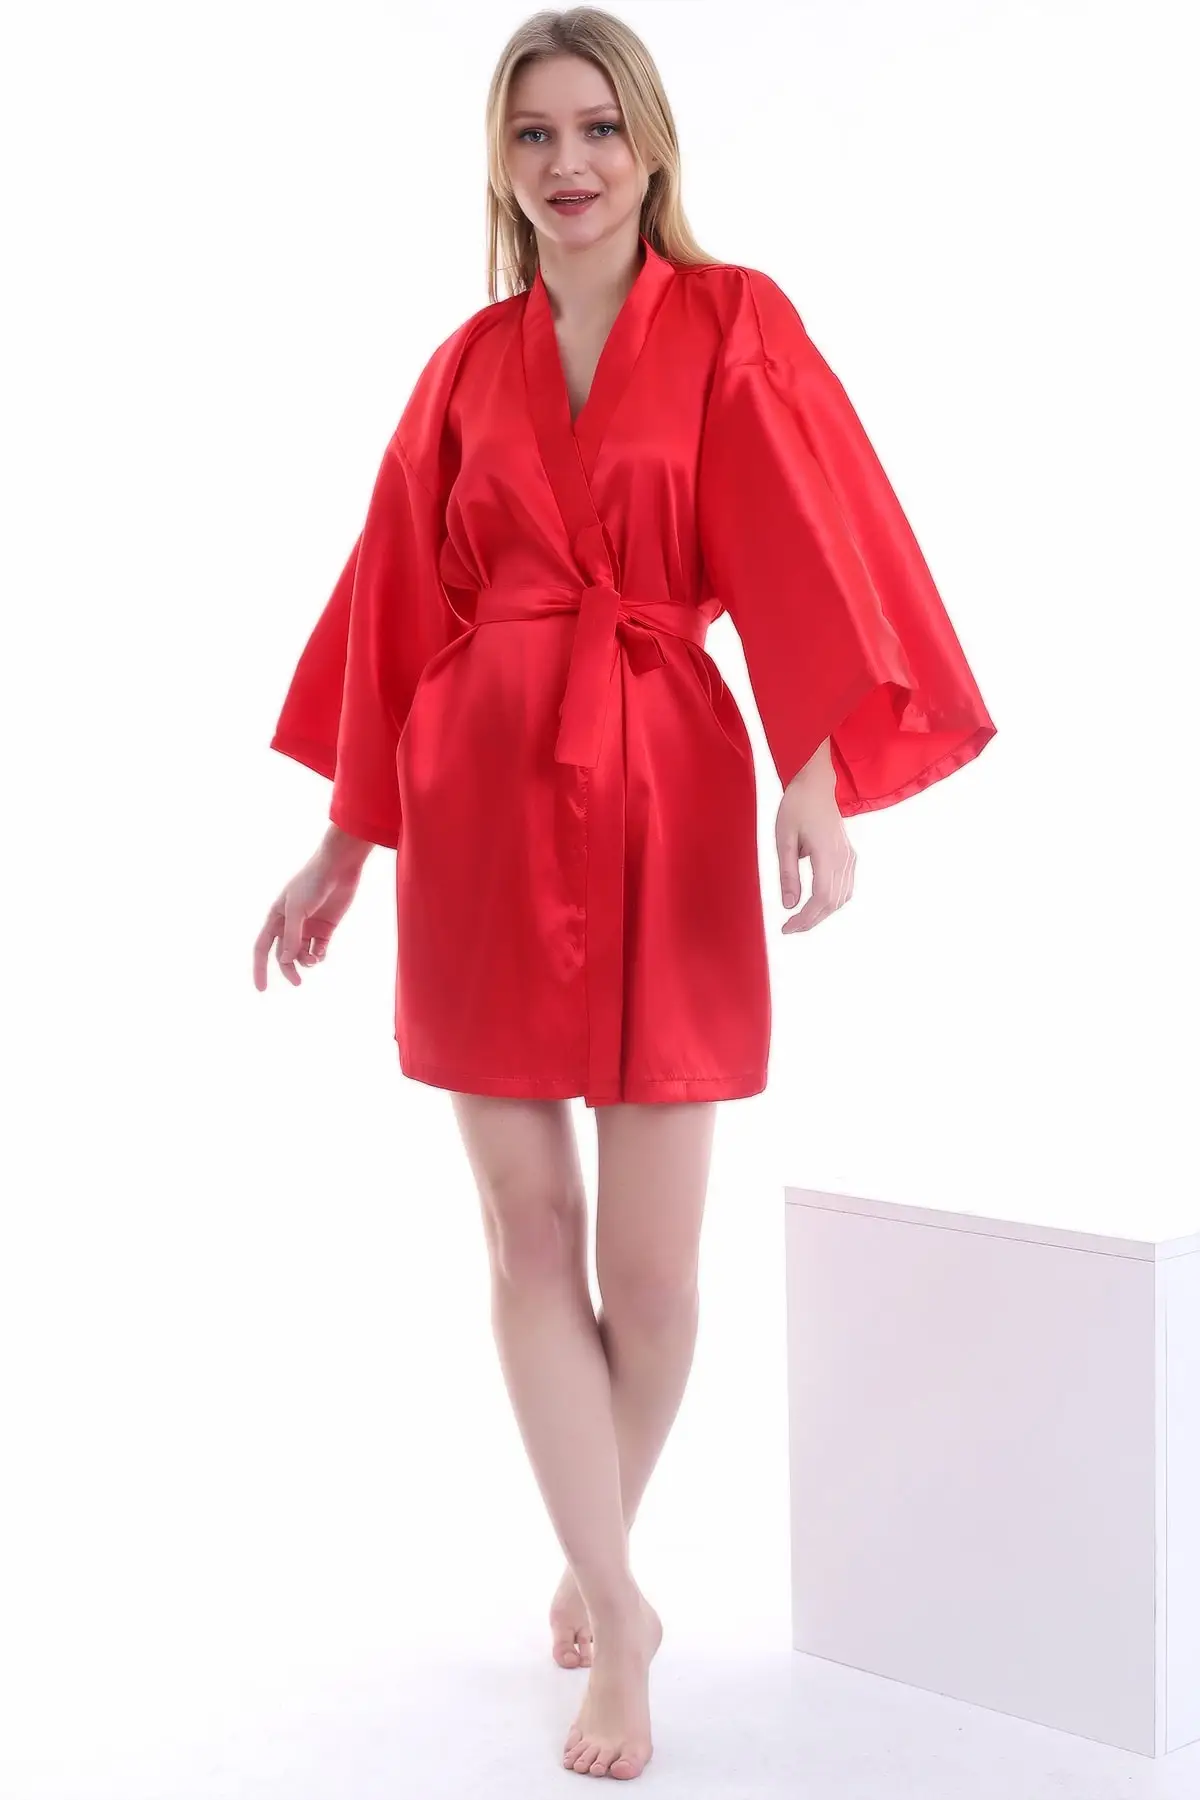 

Women's Red Arched Satin Dressing Gown nightgown satin easy to use the most preferred favorite season